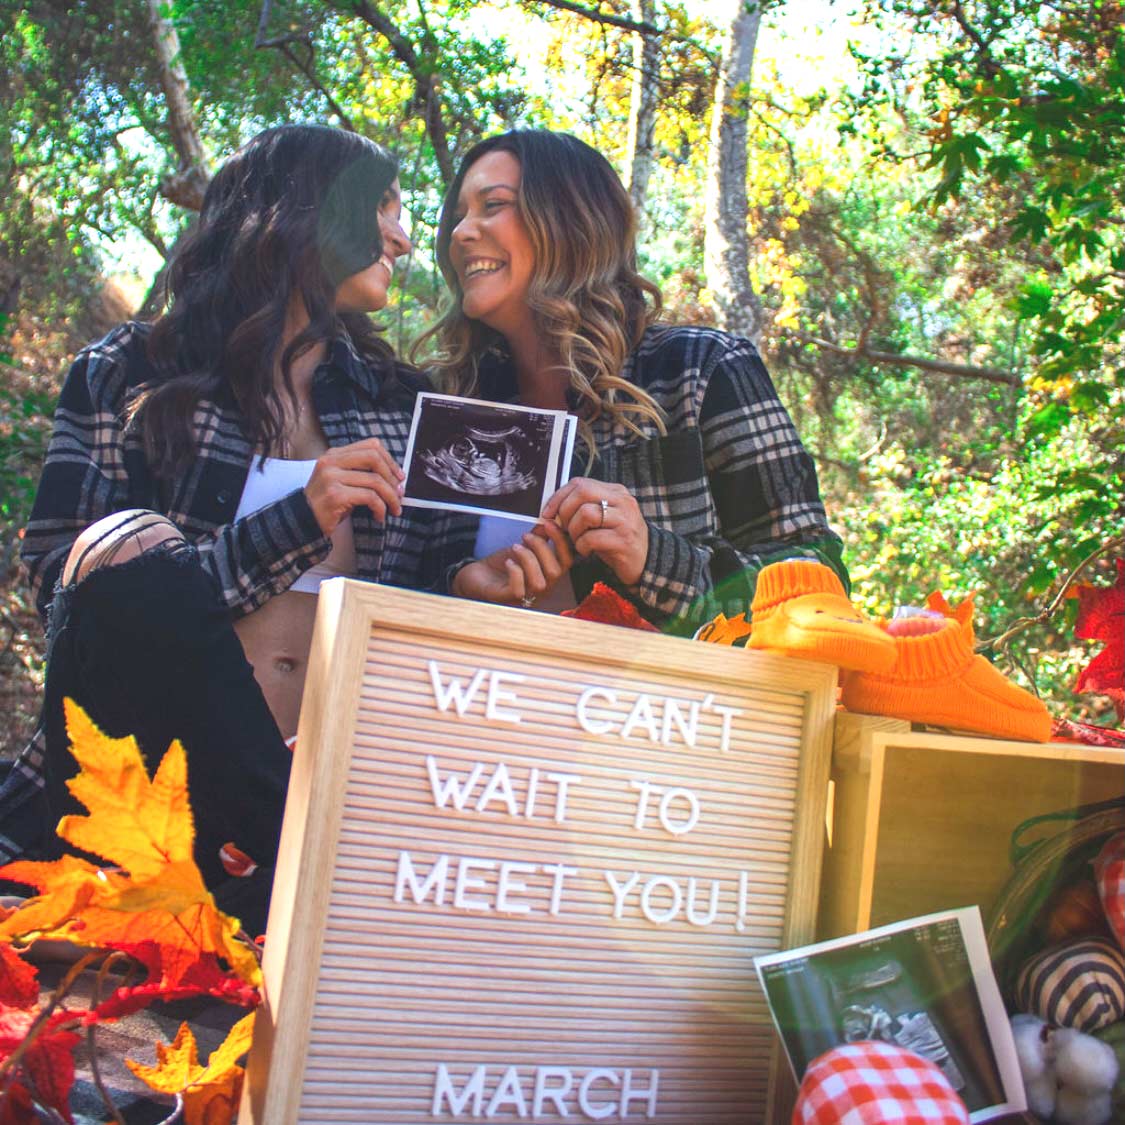 Lesbian couple holding an ultrasound of their mosie baby in the fall with a sign that says "we can't wait to meet you, March"